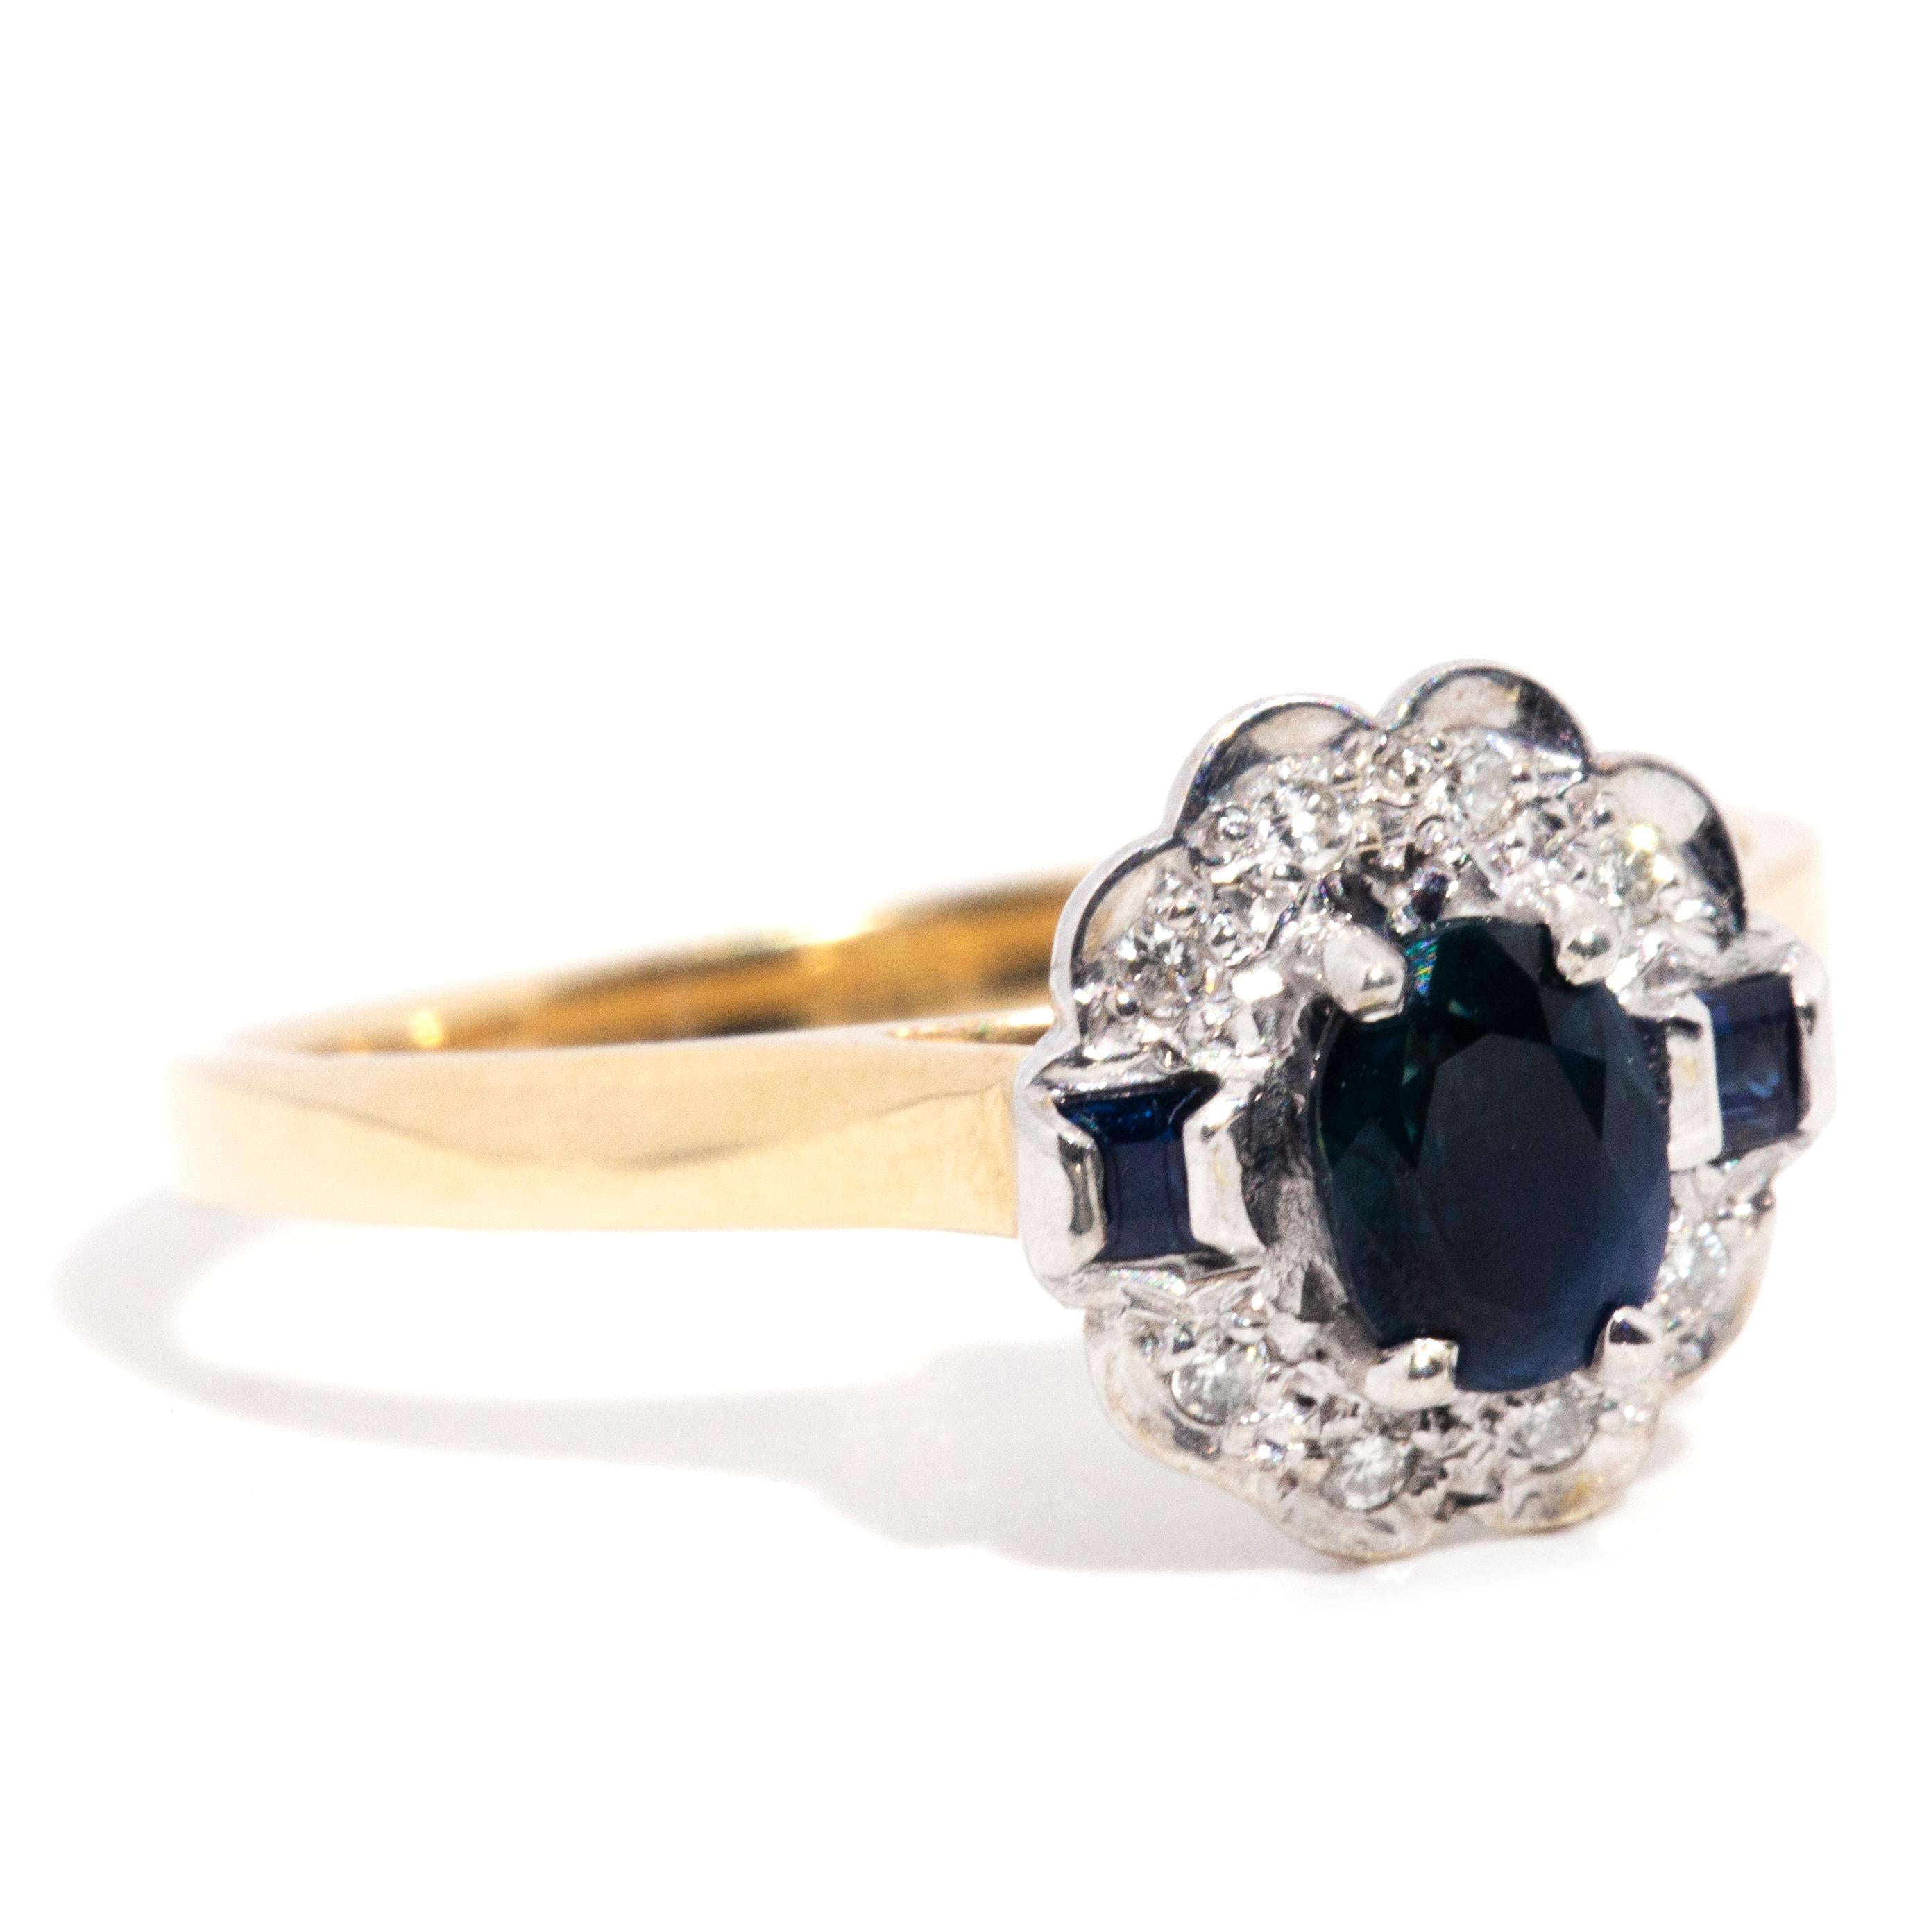 Forged in 9 carat yellow gold, this elegant vintage ring sees a charming parallel band rising to a basket gallery embellished with a gorgeous dark blue oval faceted sapphire at the centre. The surrounding halo cluster is made of round shimmering